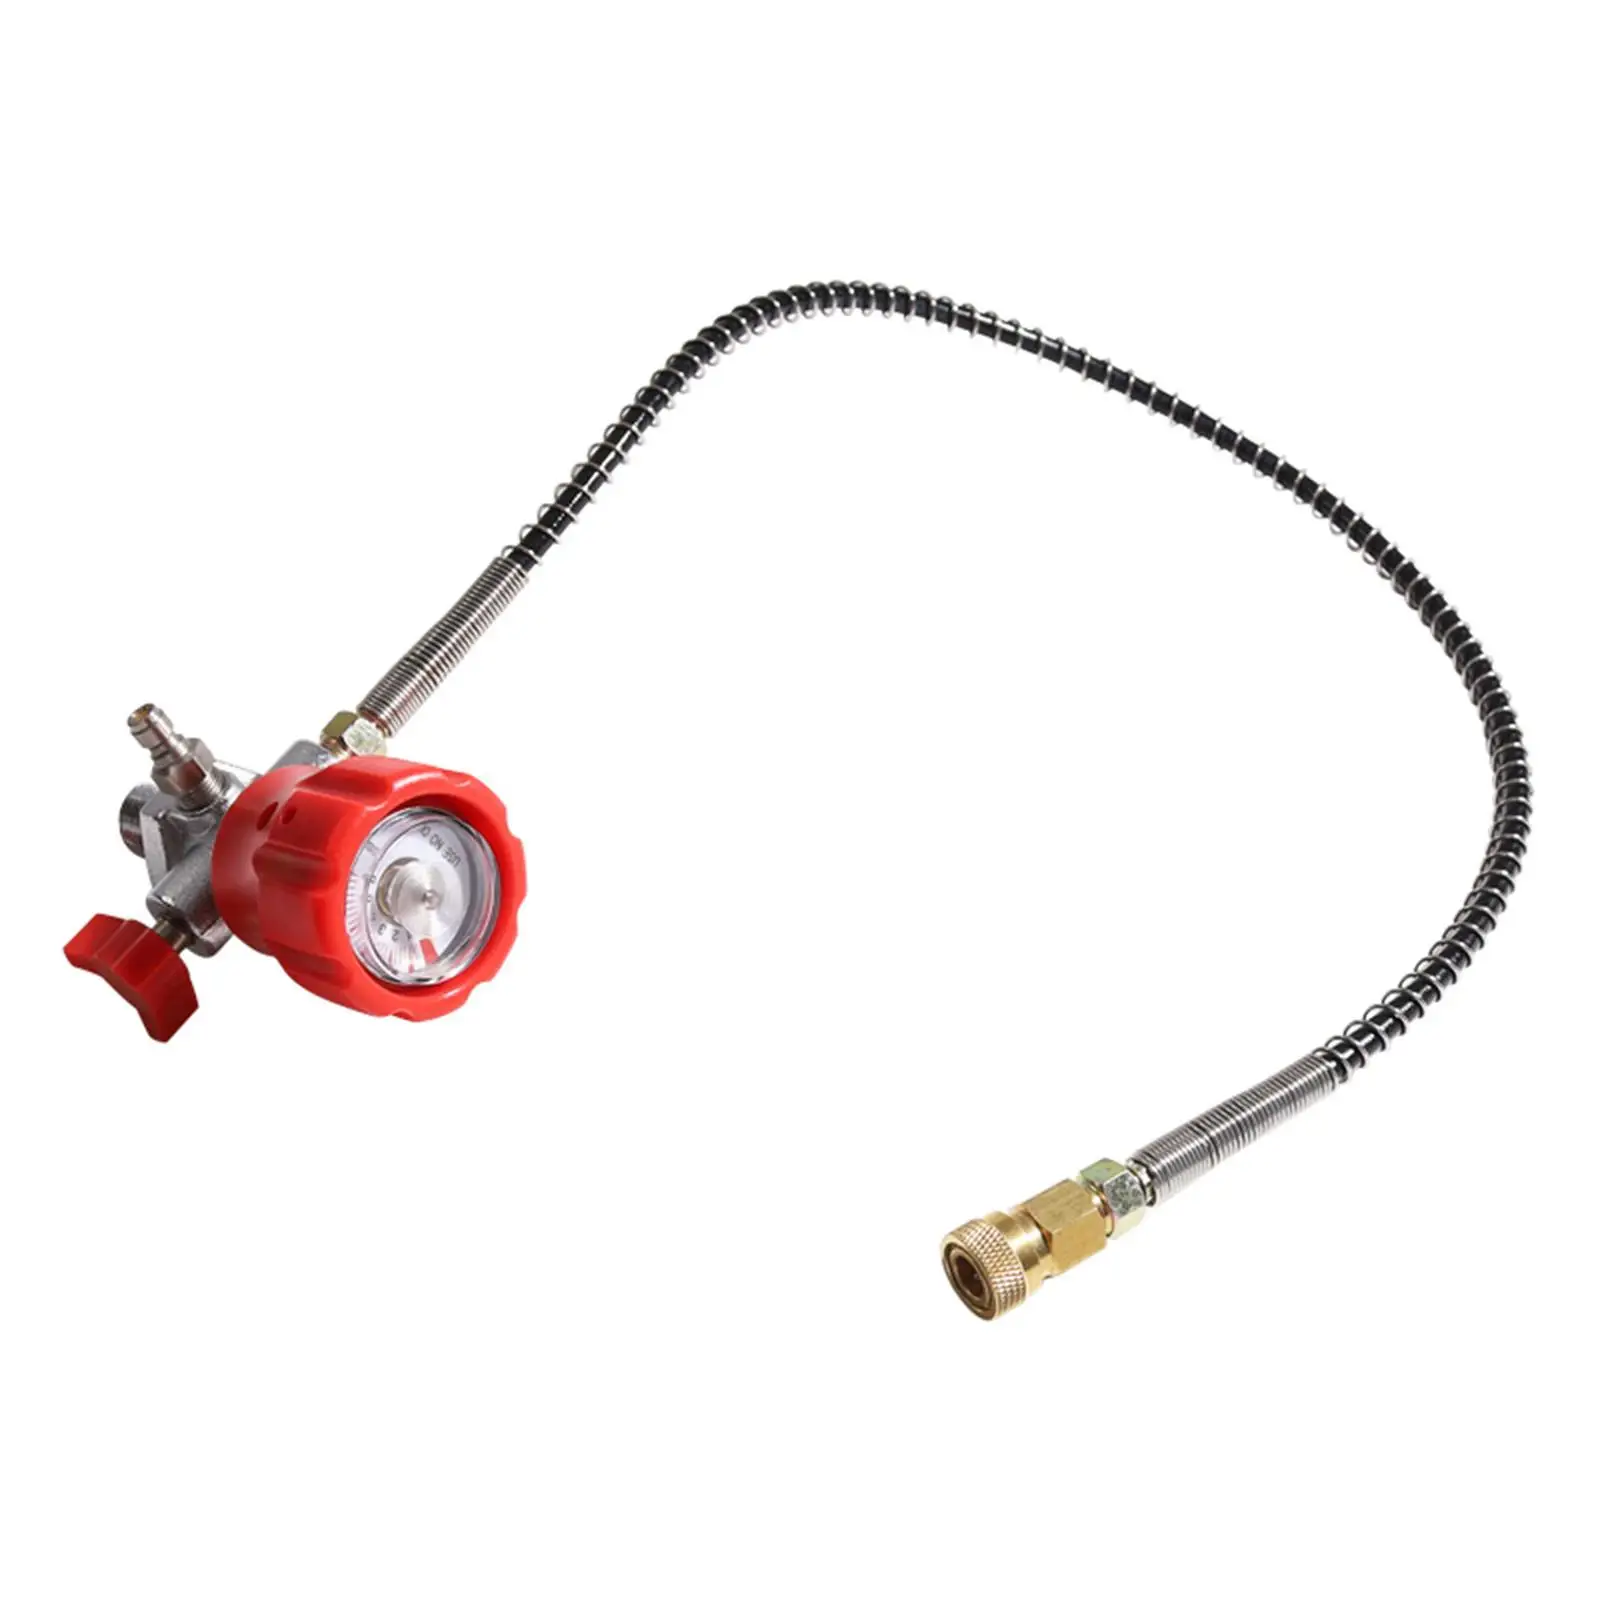 Fill Station Charging Adapter Hose Accessory Part 24inch Charging Hose Connector Tank Refill Adapter for Scuba Tank